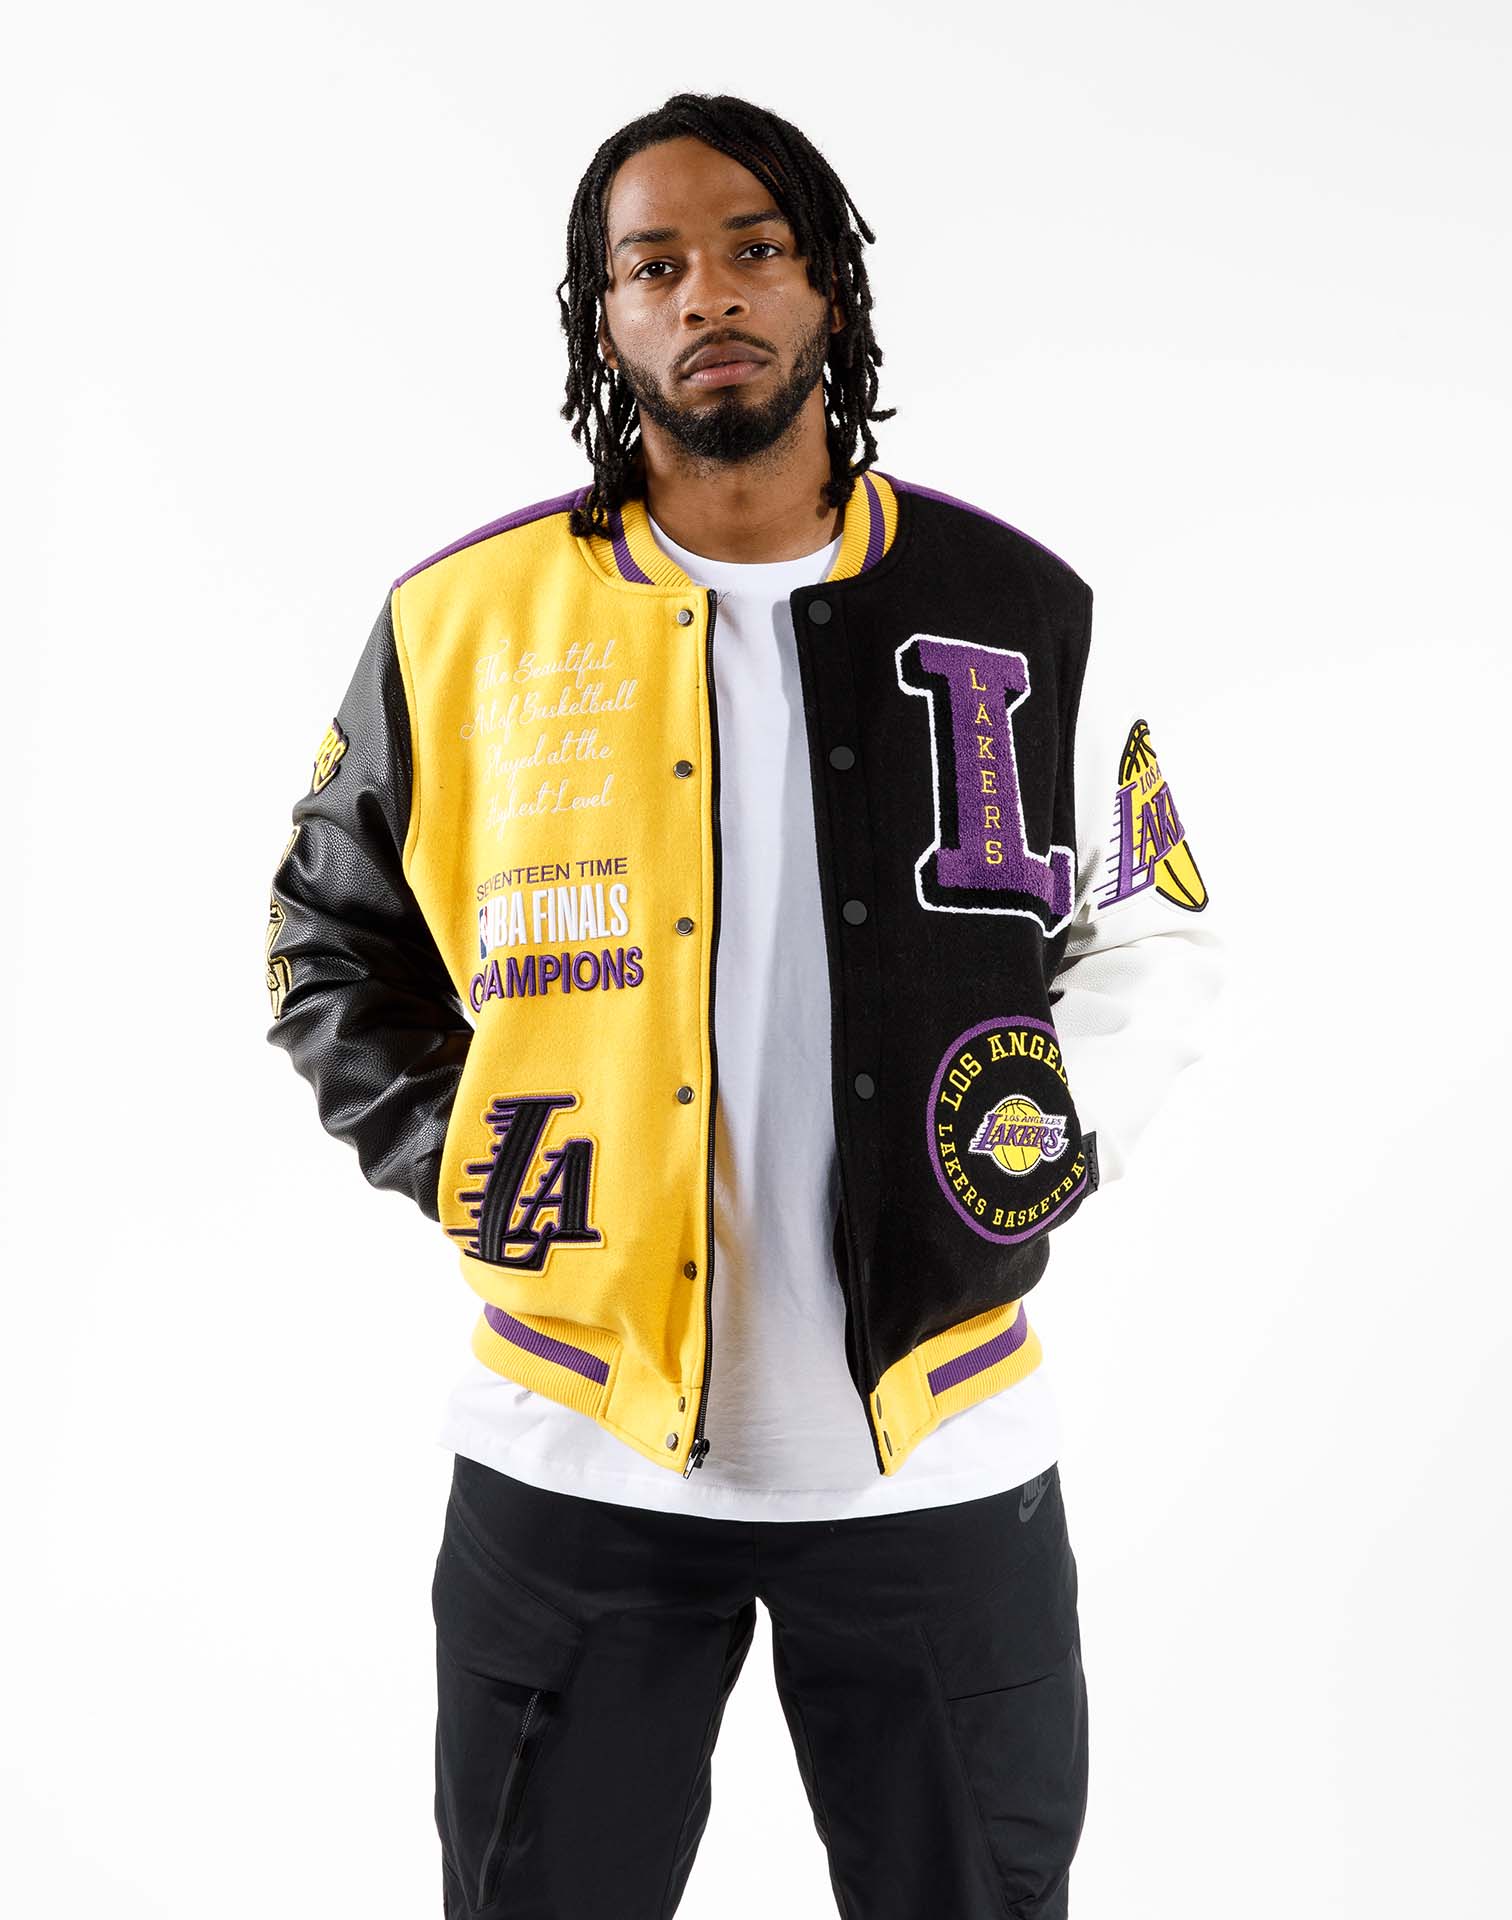 Mens Los Angeles Lakers Jacket, Lakers Pullover, Los Angeles Lakers Varsity  Jackets, Fleece Jacket